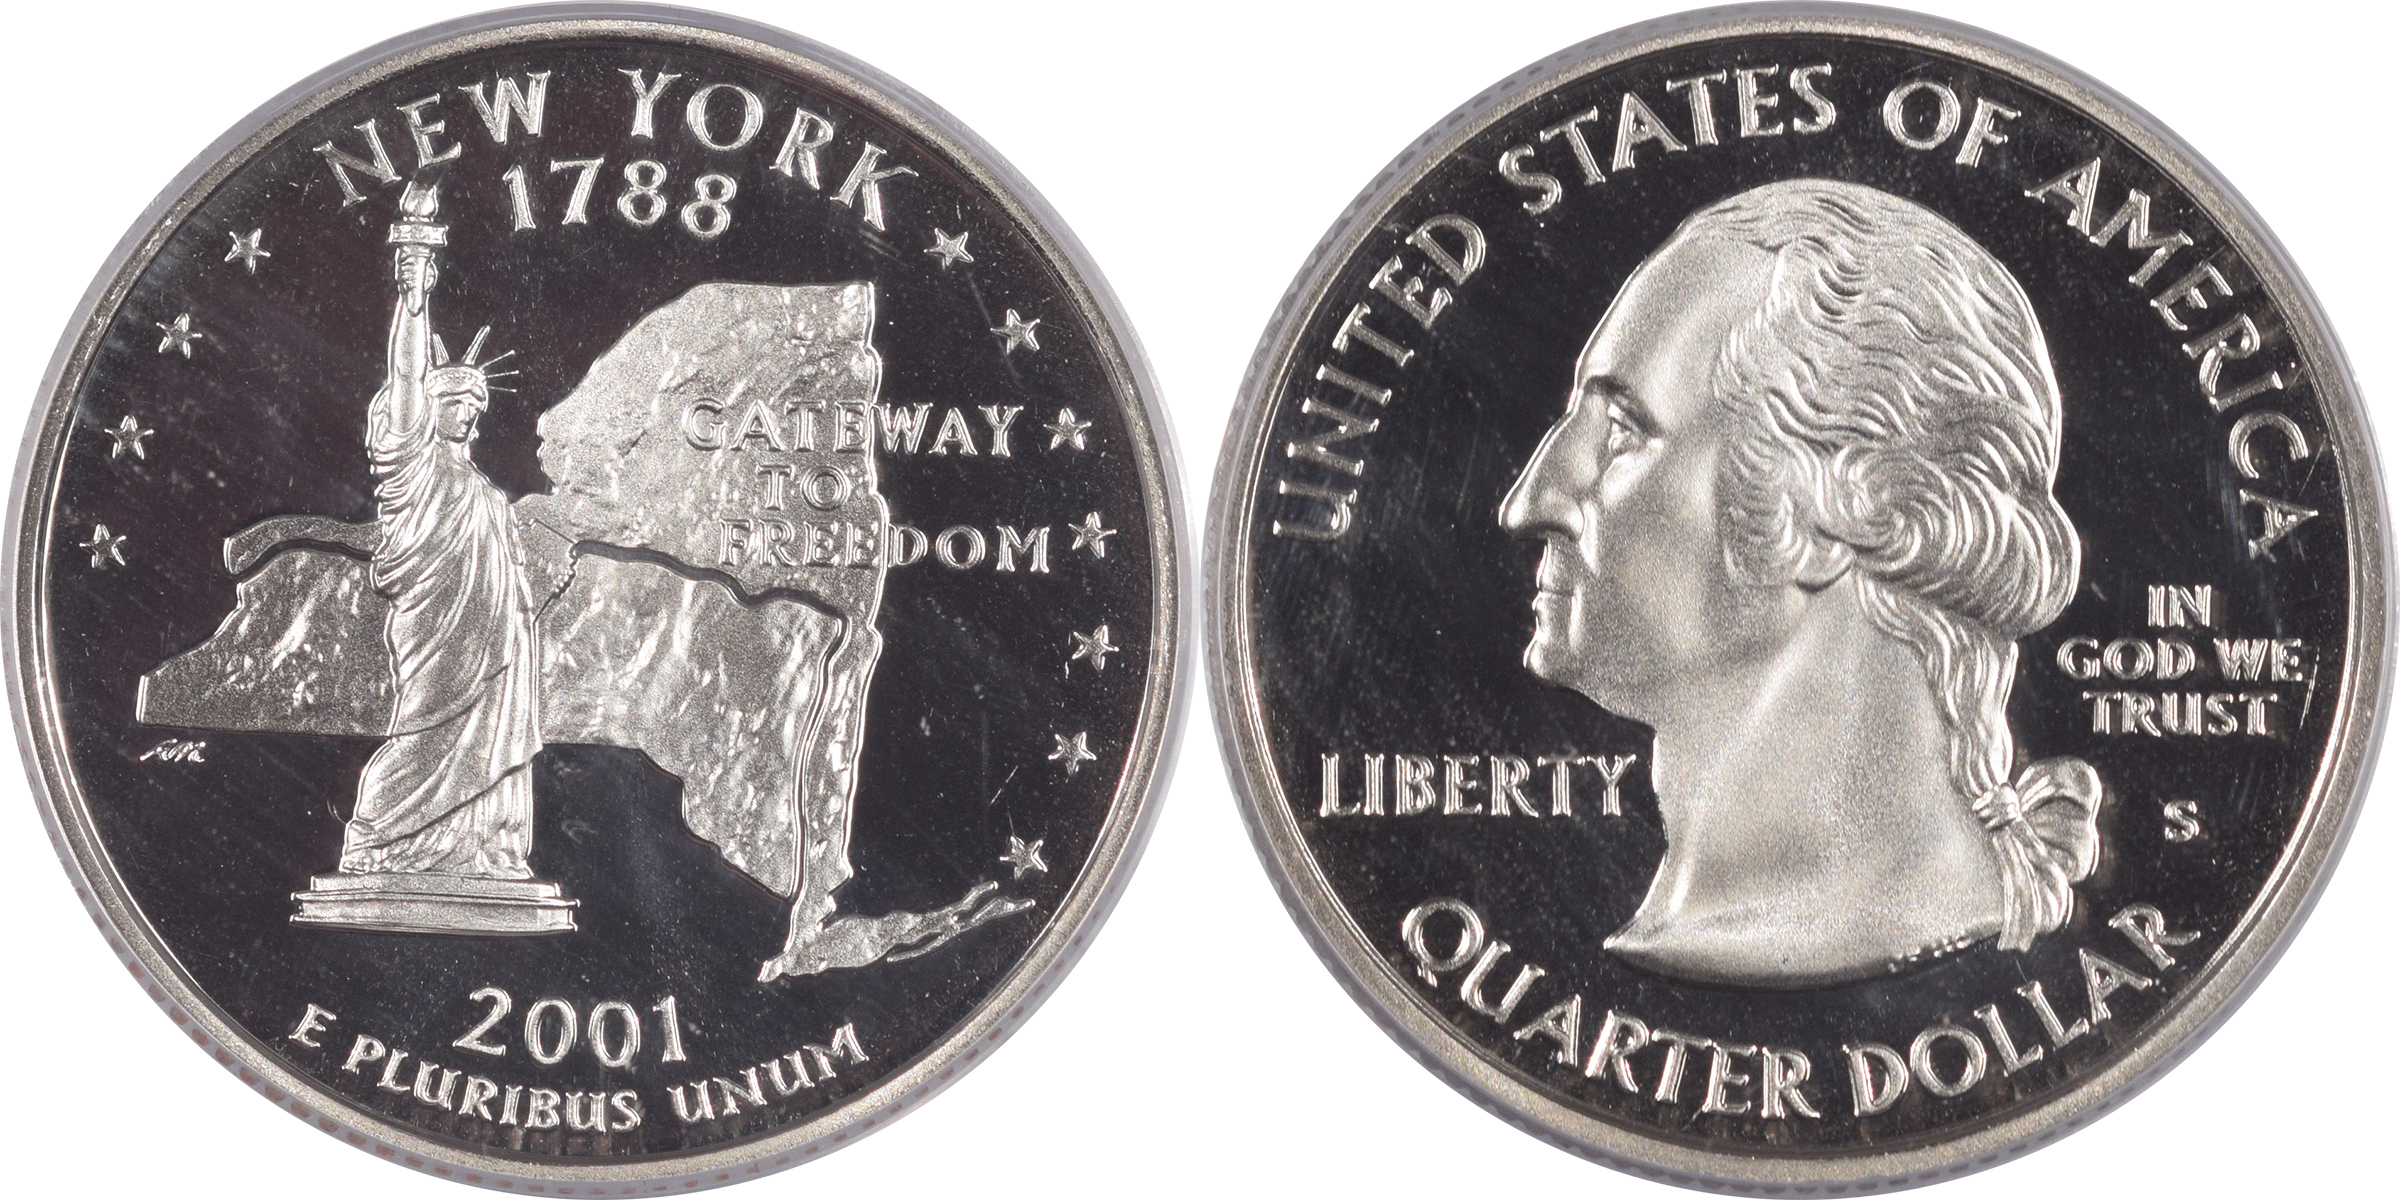 2001-S NEW YORK PROOF STATE QUARTER 2 COIN SILVER & CLAD ...